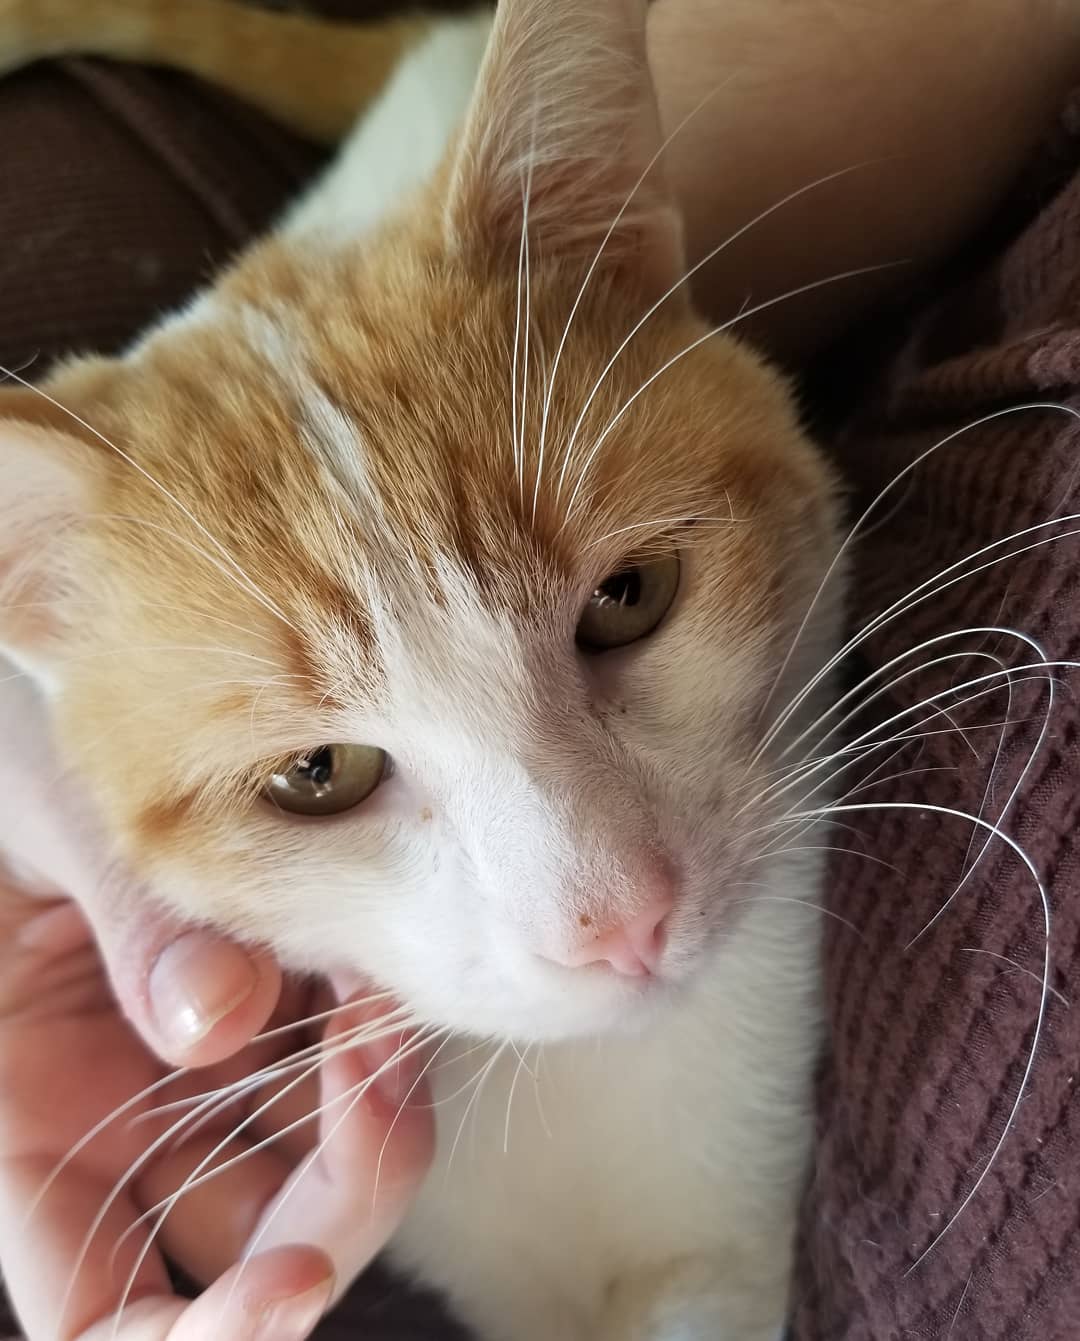 a beautiful & handsome creamsicle tomcat looking directly into the camera with his big green eyes. He has a little pink nose. His owner's hand can be seen delicately brushing his cheek.